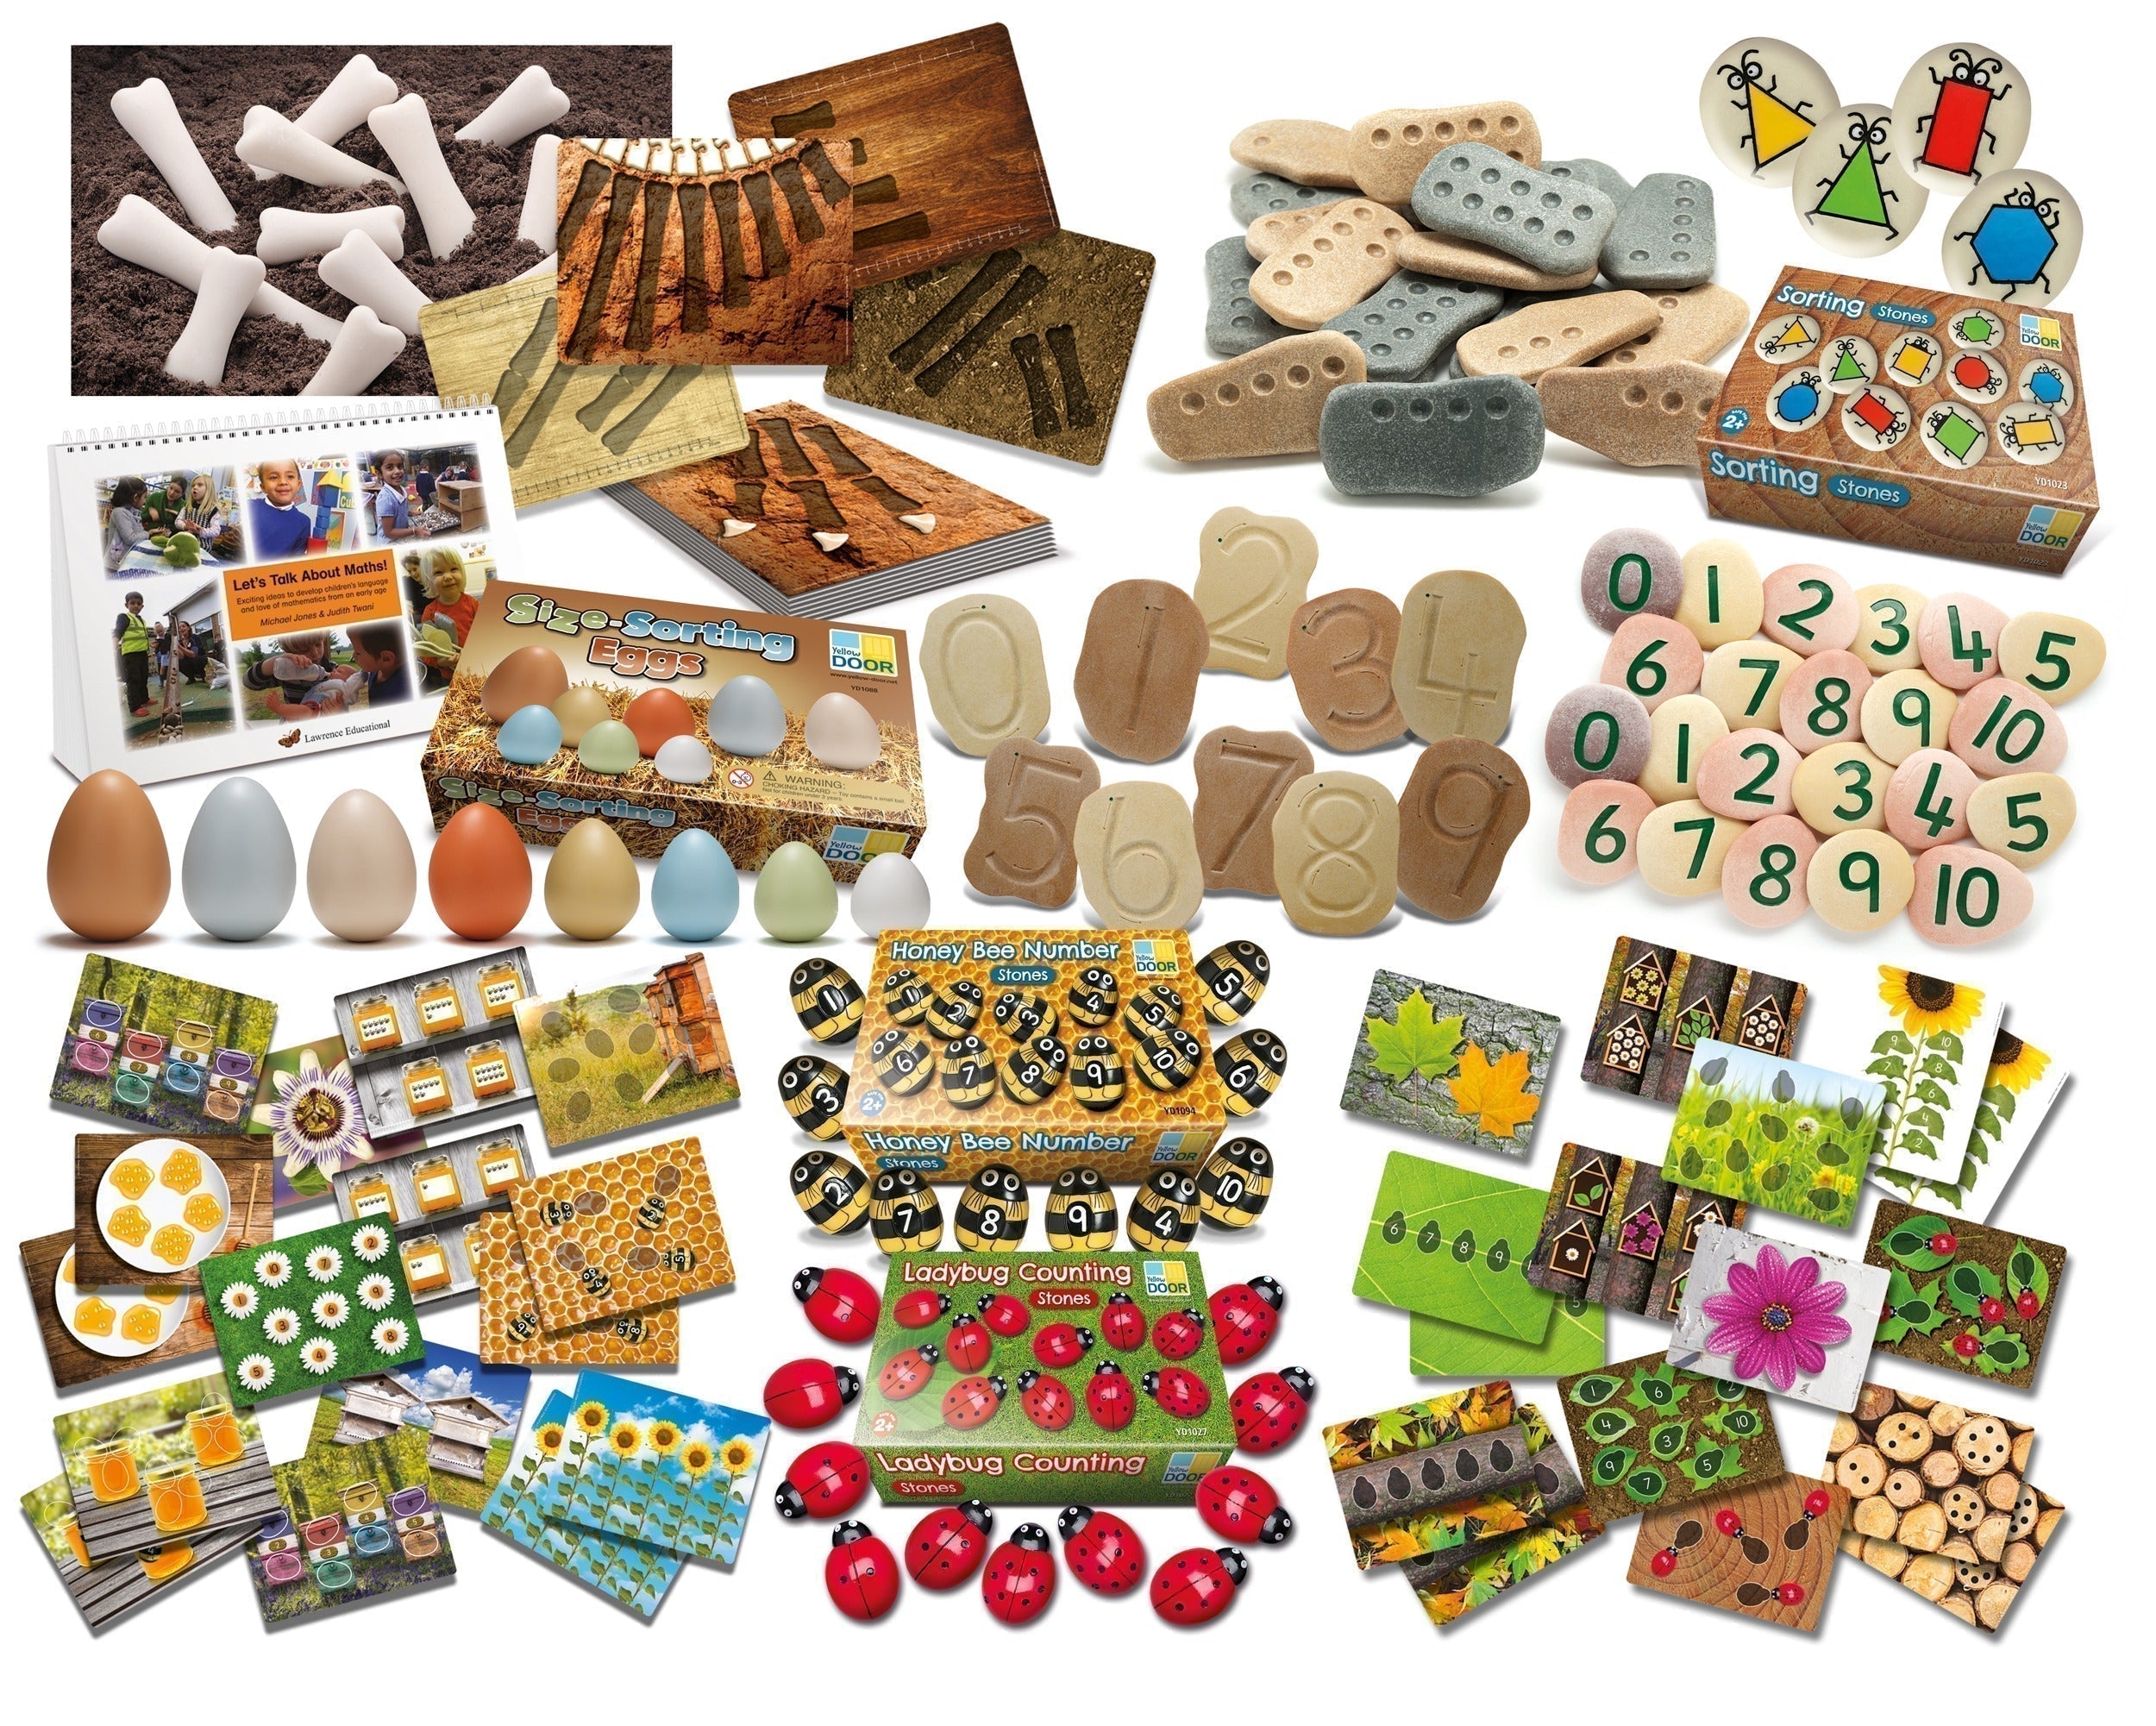 Let’s Boost Early Maths Outdoor Kit, There is much maths to be found in the natural world and now even more, with this bumper kit of resources especially designed to be taken outdoors! All these resources work well independently or alongside each other and other natural materials, encouraging a range of collecting, counting and comparing activities. Important maths language will be inspired as children naturally play, problem-solve and investigate number, shape and measures. Taking maths learning outside pr